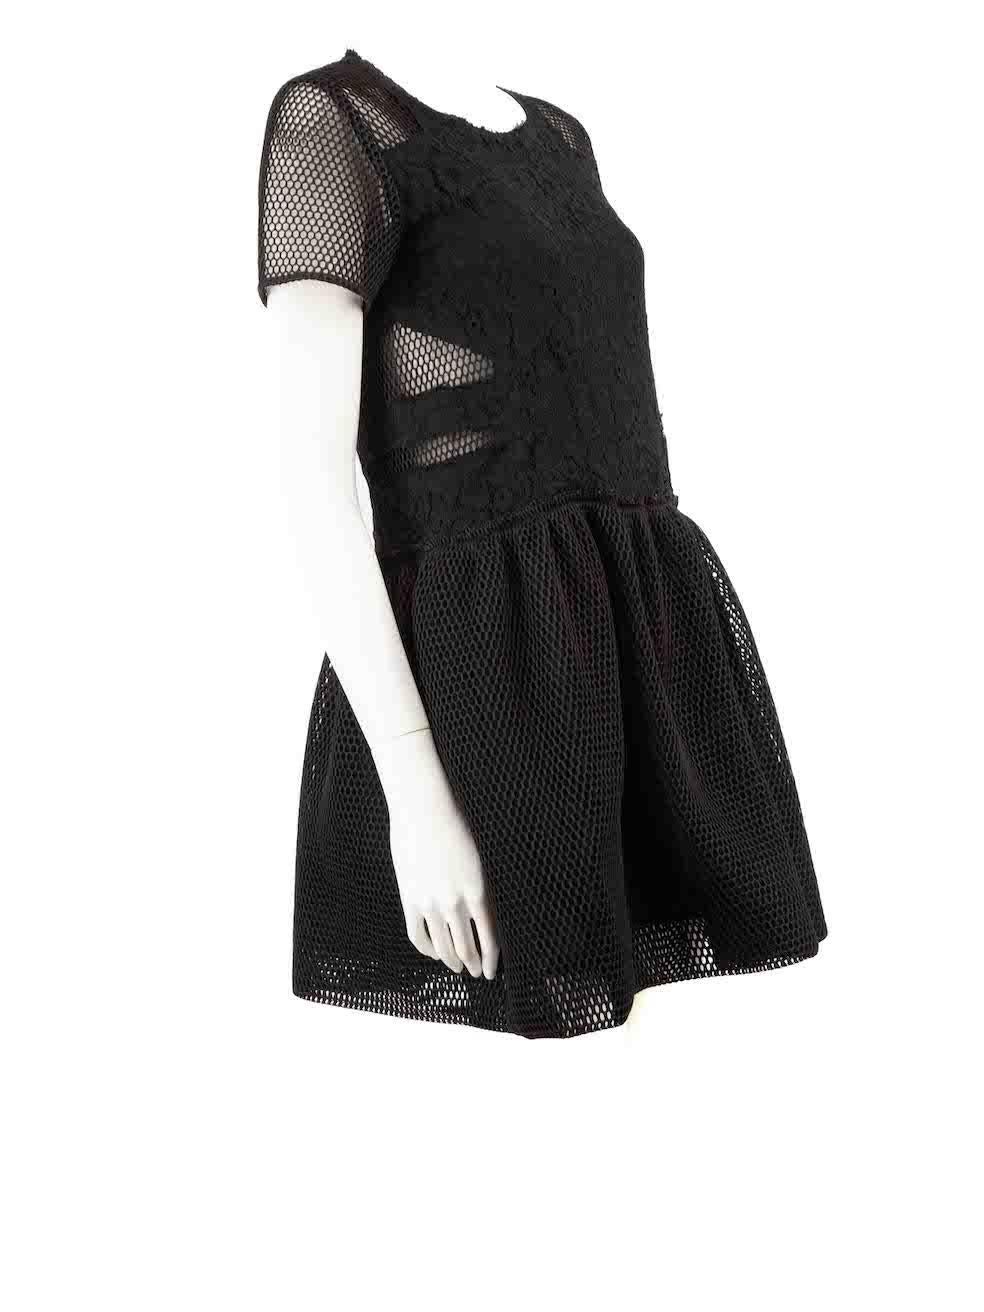 CONDITION is Very good. Minimal wear to dress is evident. Minimal frayed edges to neckline and waistline on this used See New York designer resale item.
 
 Details
 Black
 Polyester
 Dress
 Mini
 Short sleeves
 Lace panel top
 Round neck
 Back zip